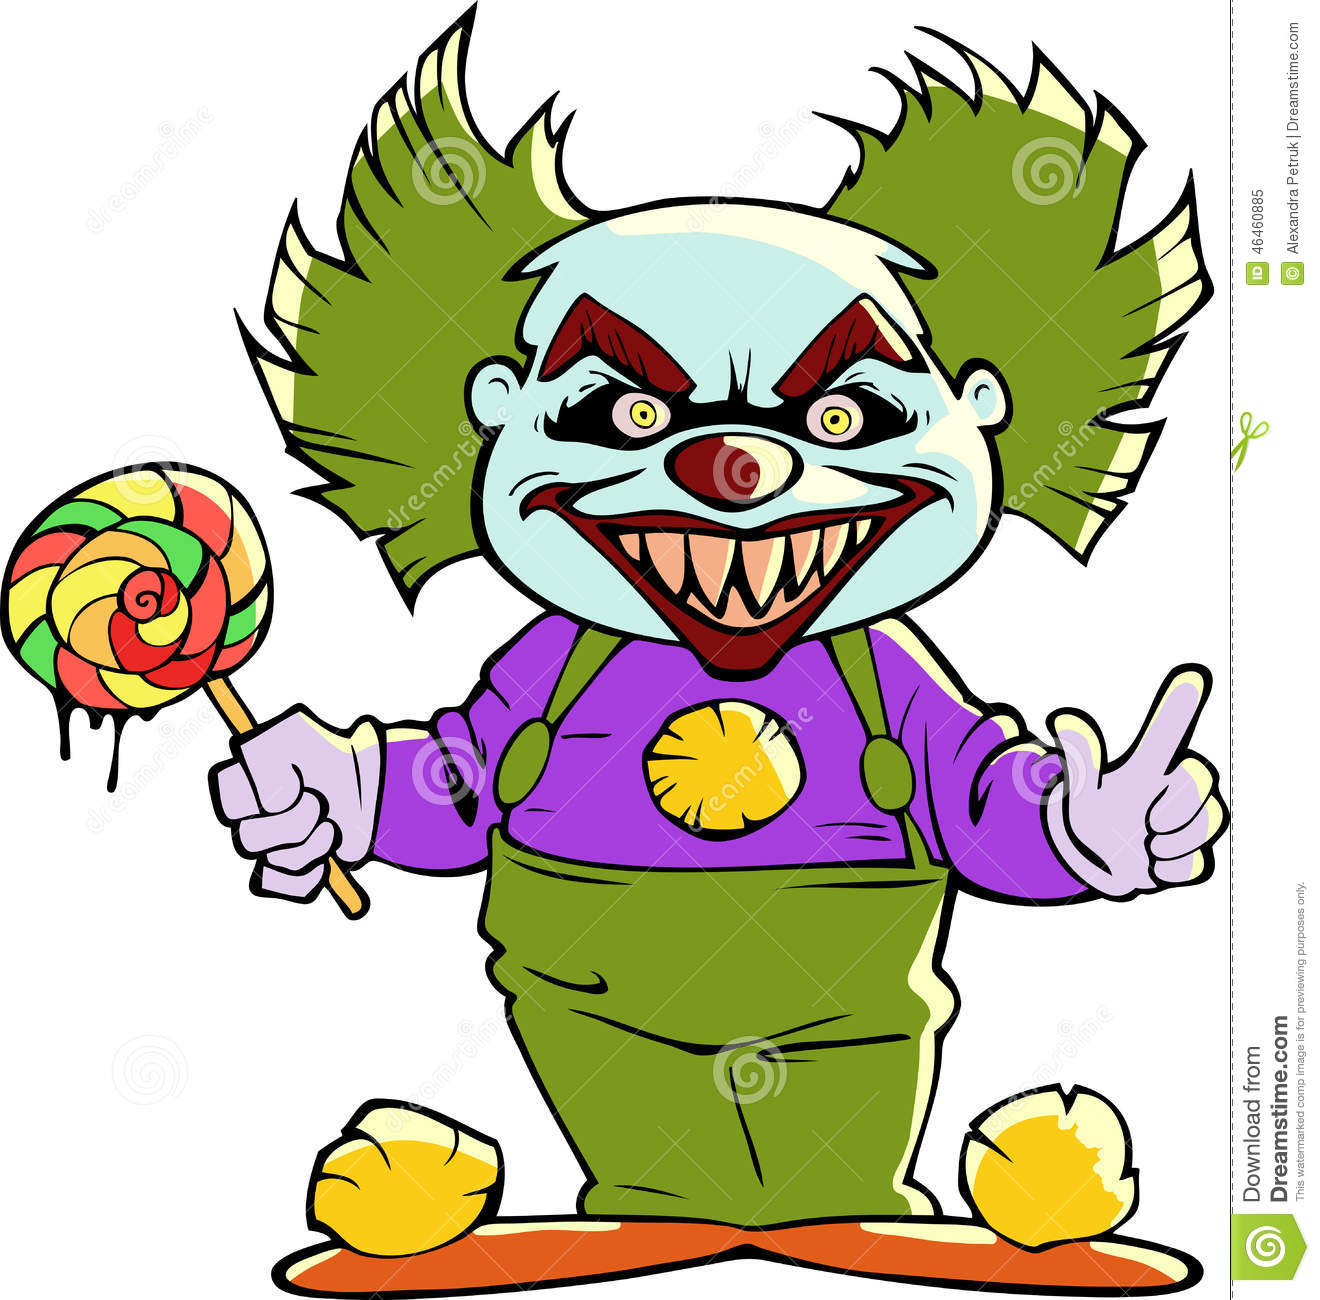 Scary Clown Cartoon - Clown Clipart Creepy Pictures On Cliparts Pub ...